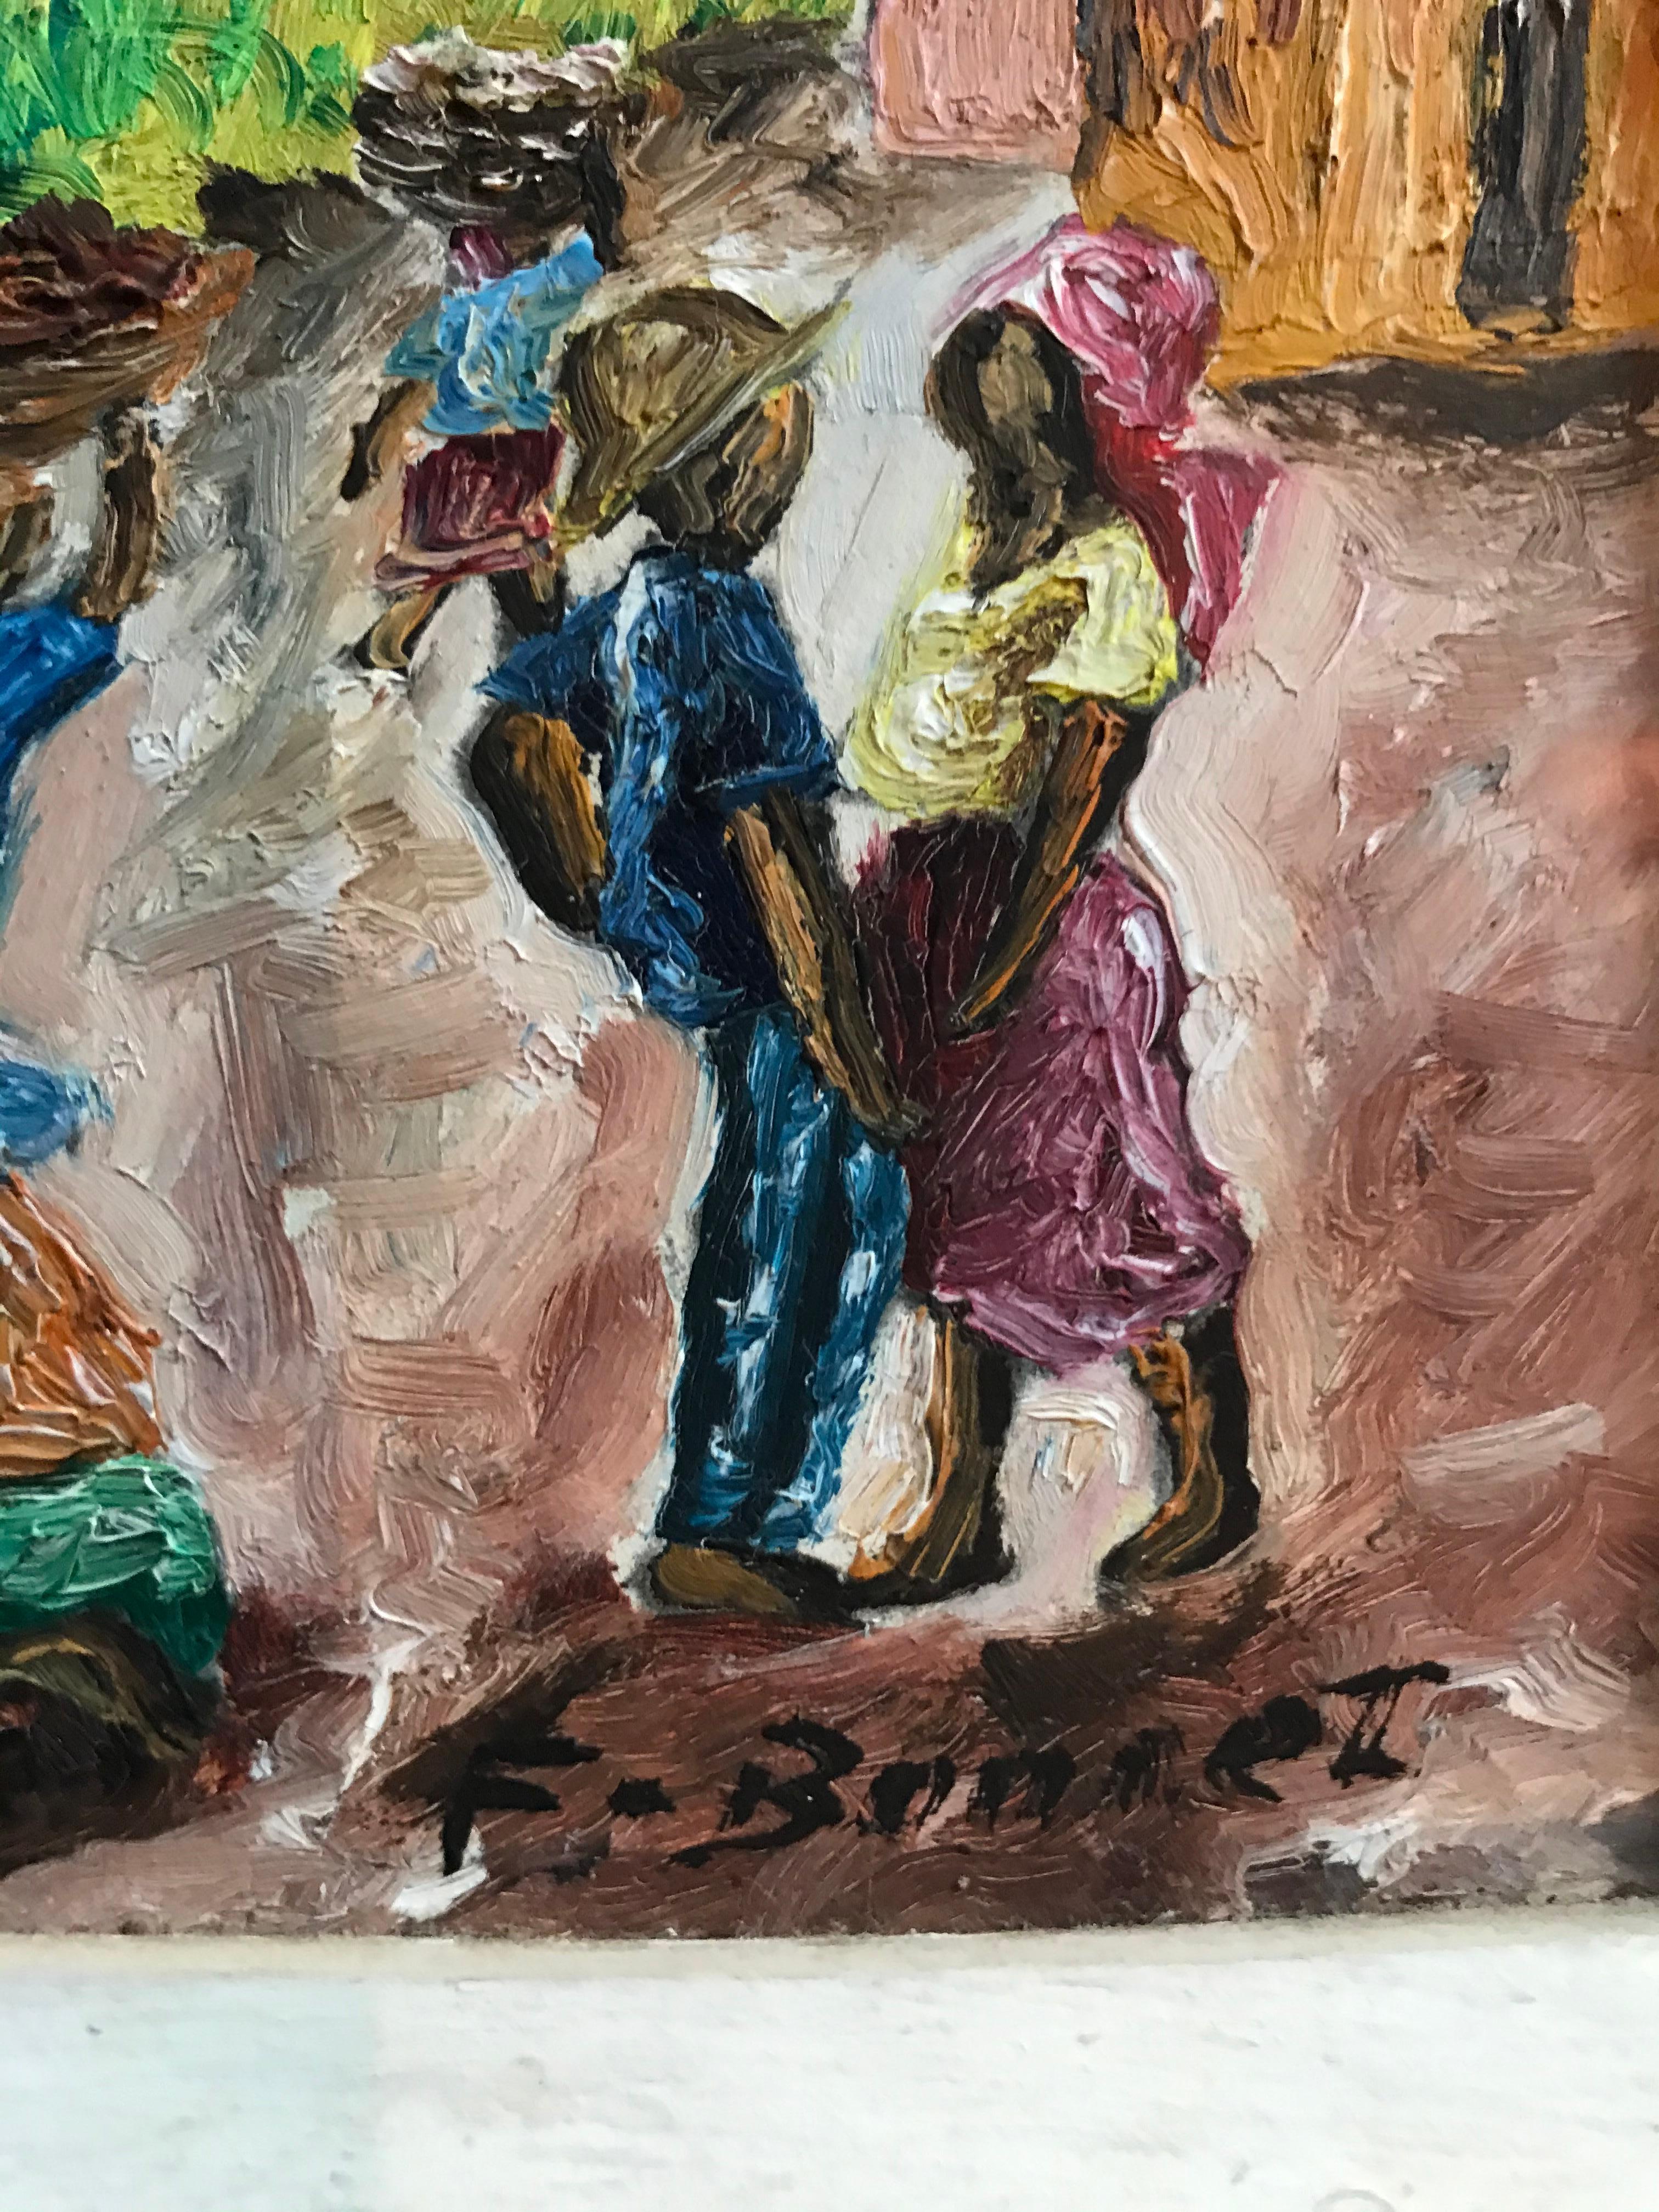 Small Haitian painting from the 1960s of a street during market day. People carrying baskets of fruit/vegetables and a couple conversing in the foreground, painted with thick bold colors evoking the climate and culture of Haiti. Period hand carved